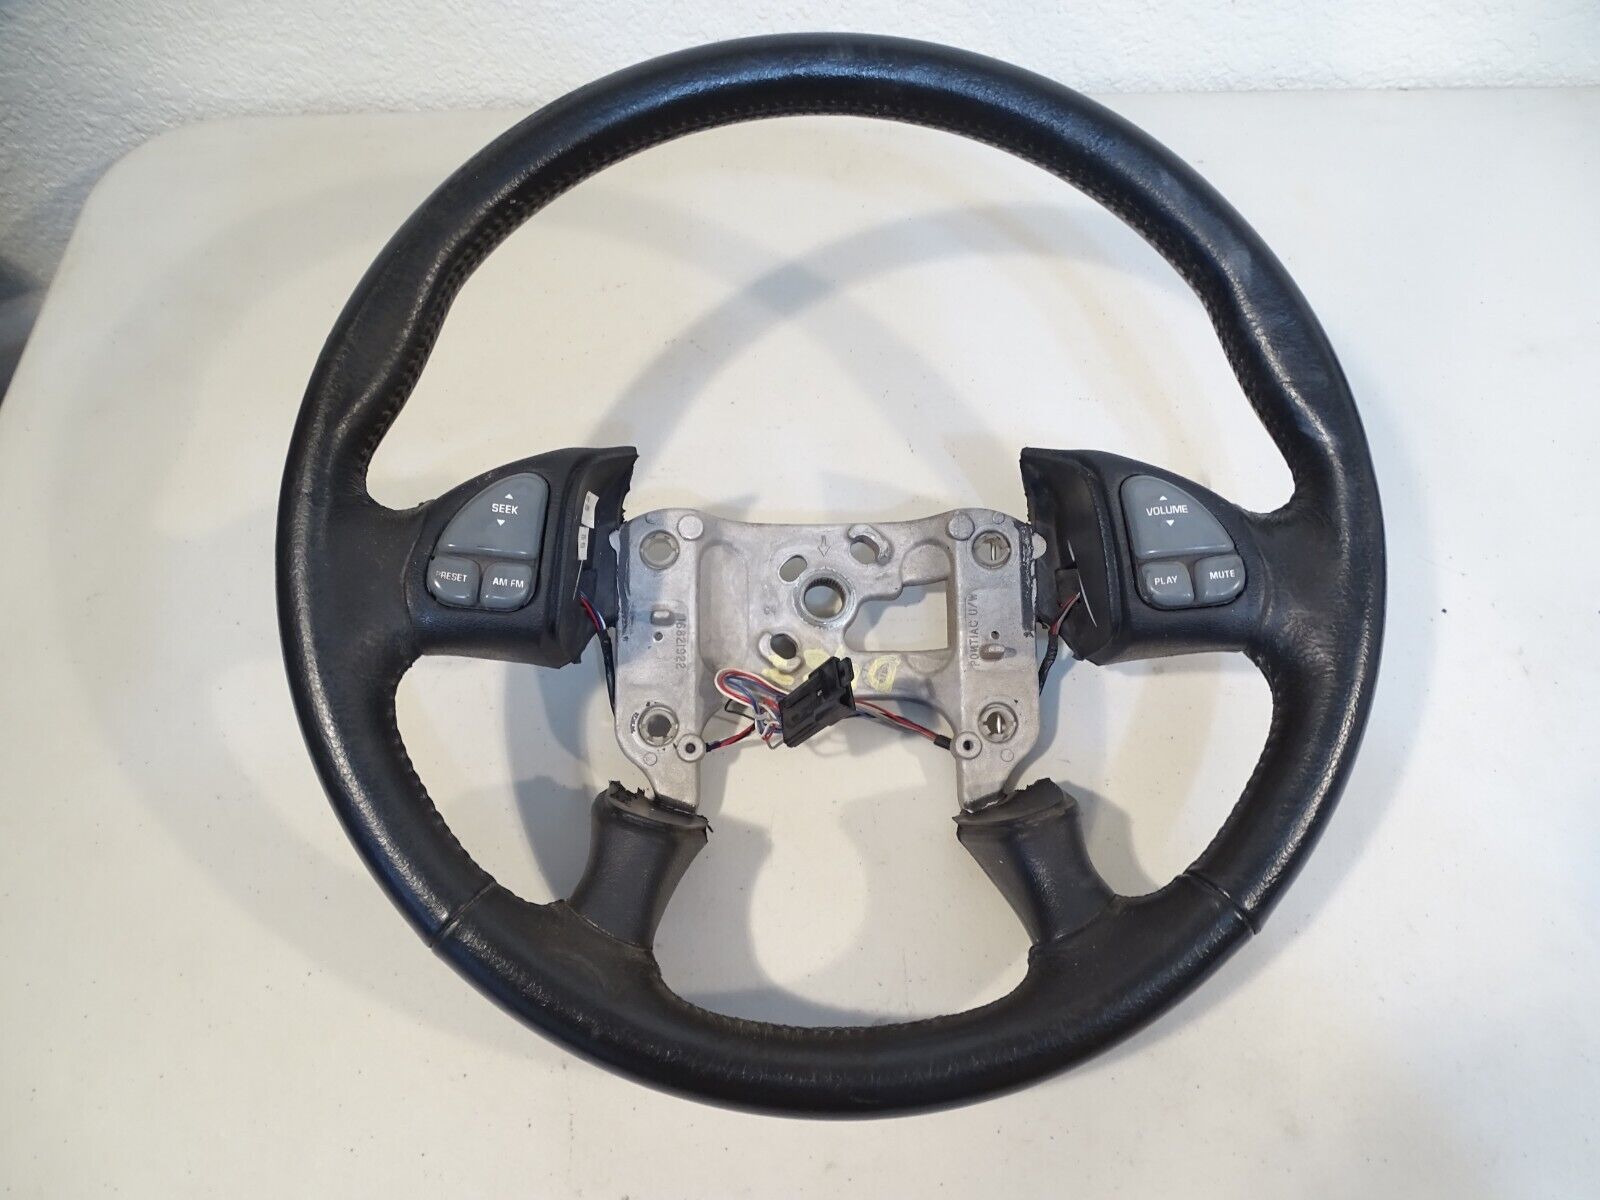 PONTIAC MONTANA STEERING WHEEL WITH SWITCHES - PART # 16821922